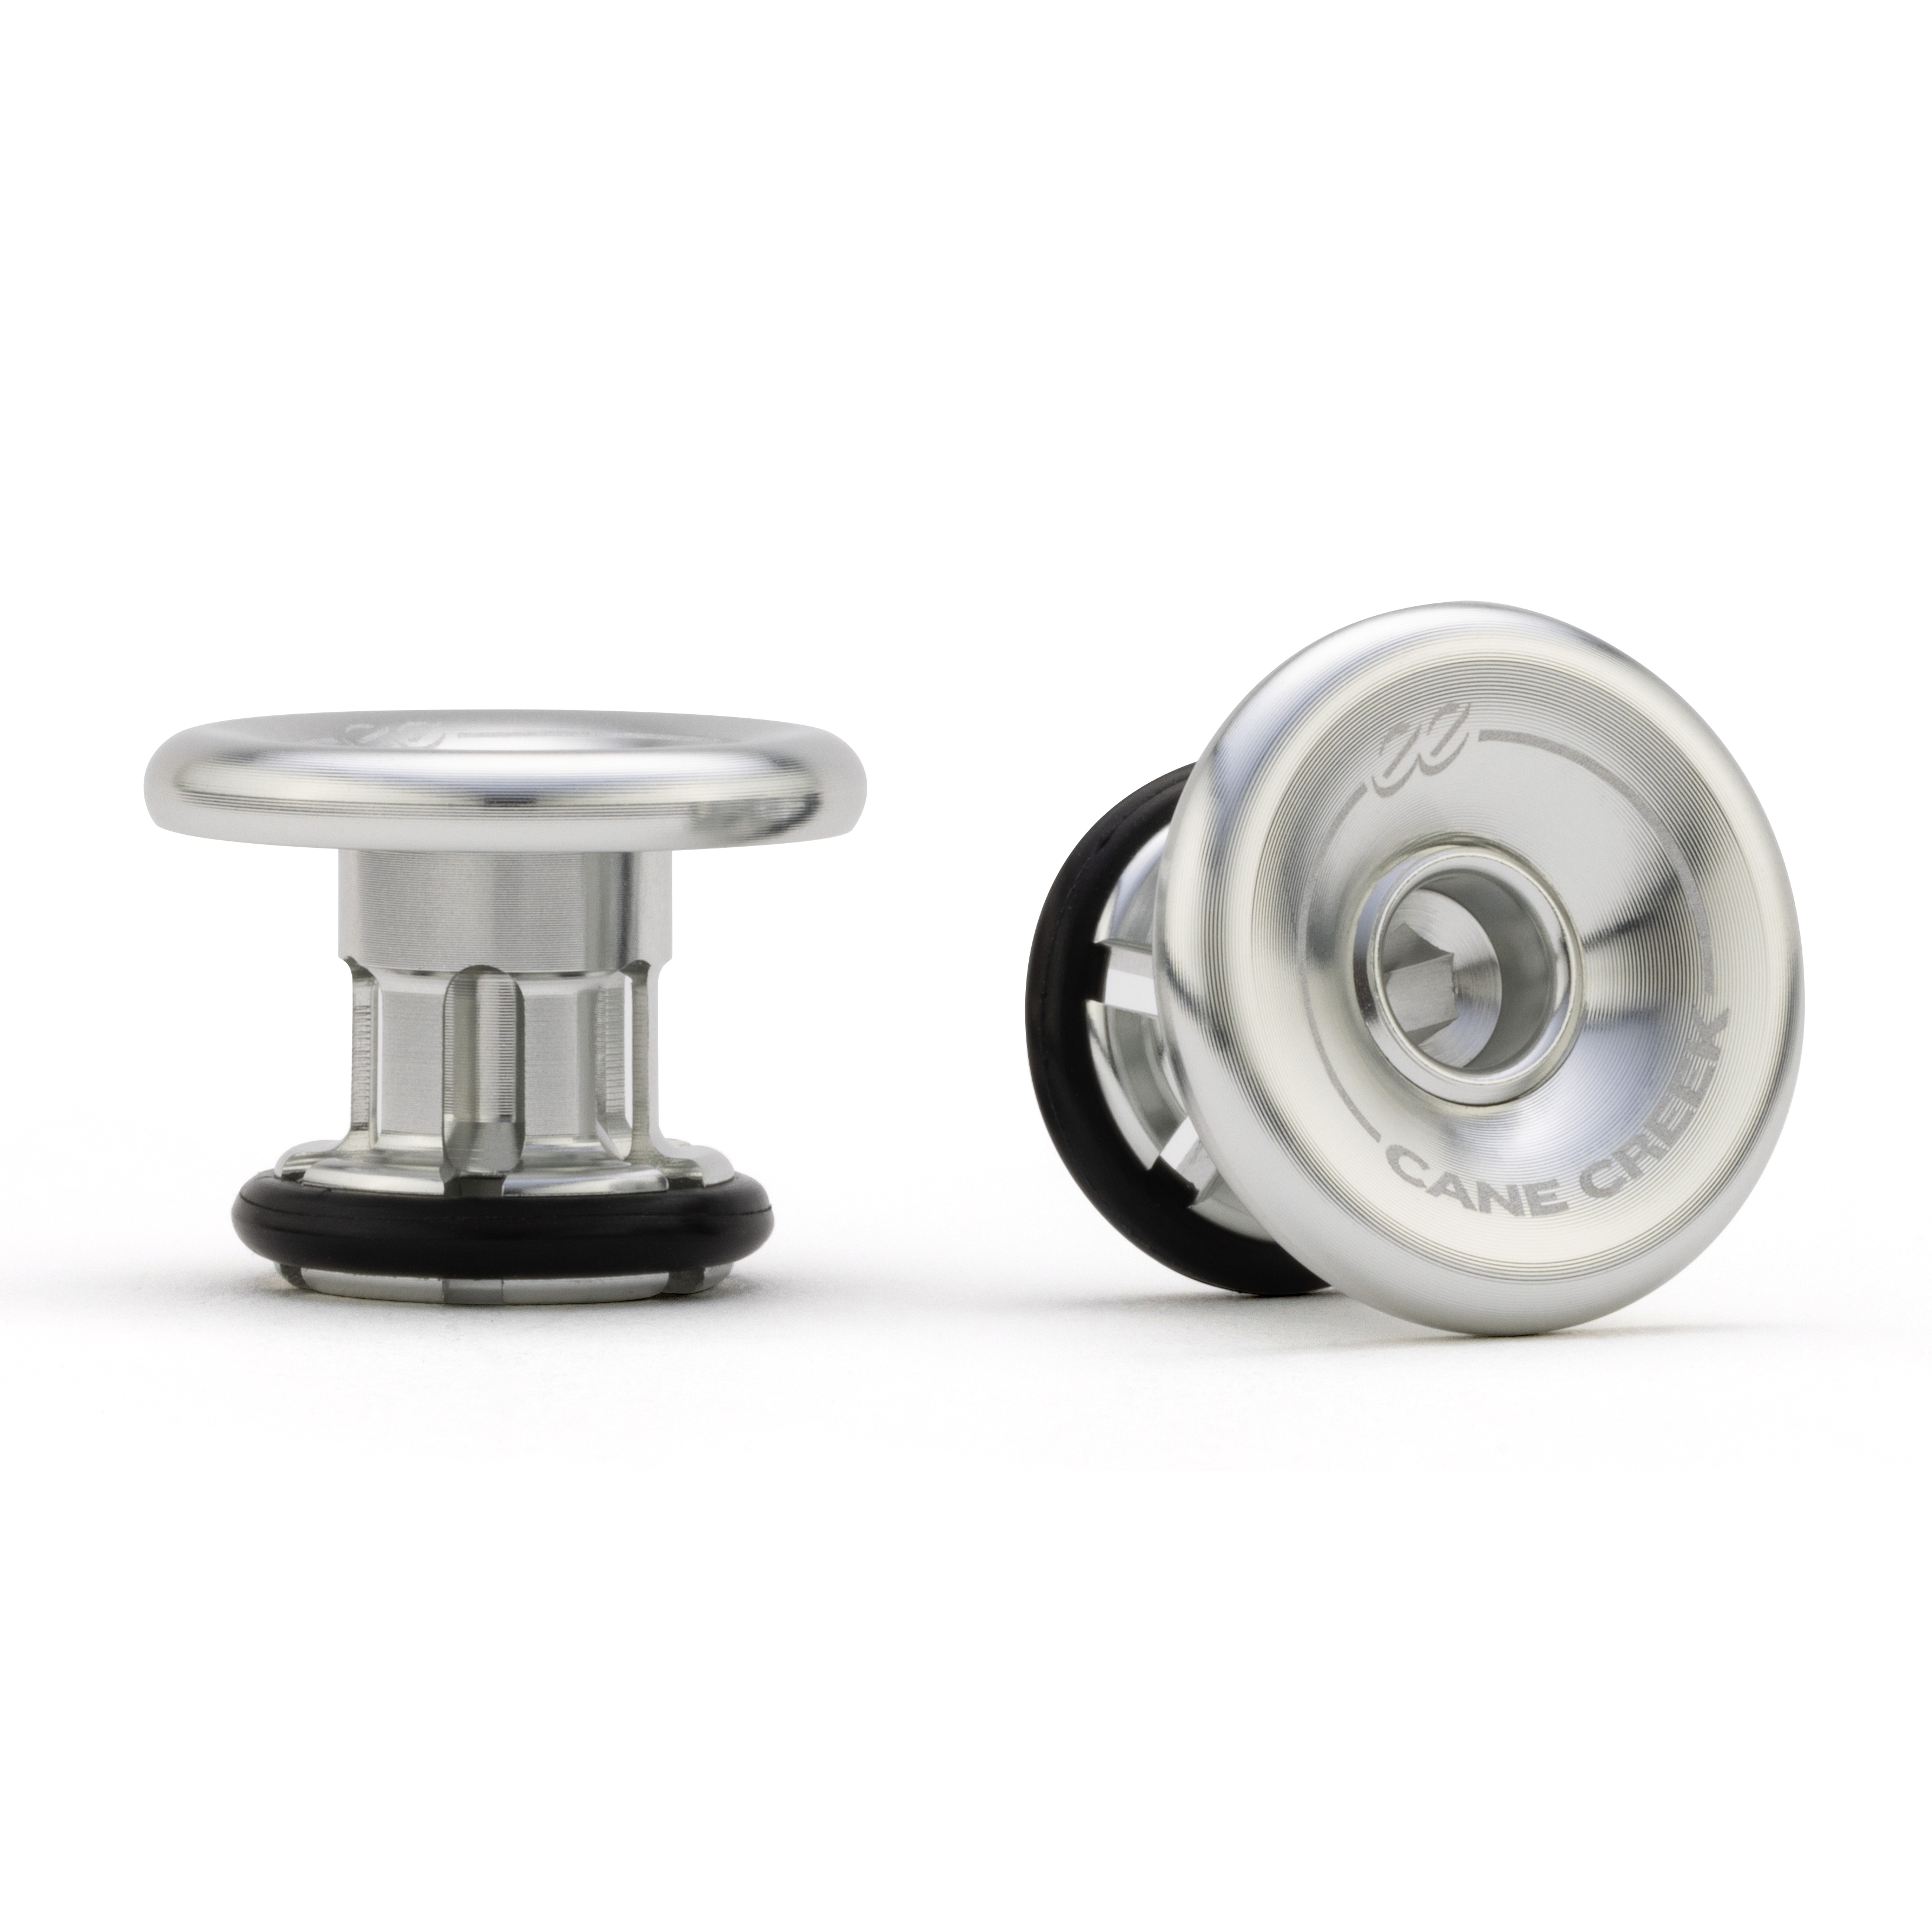 Picture of Cane Creek eeBarKeep Bar End Plugs - silver